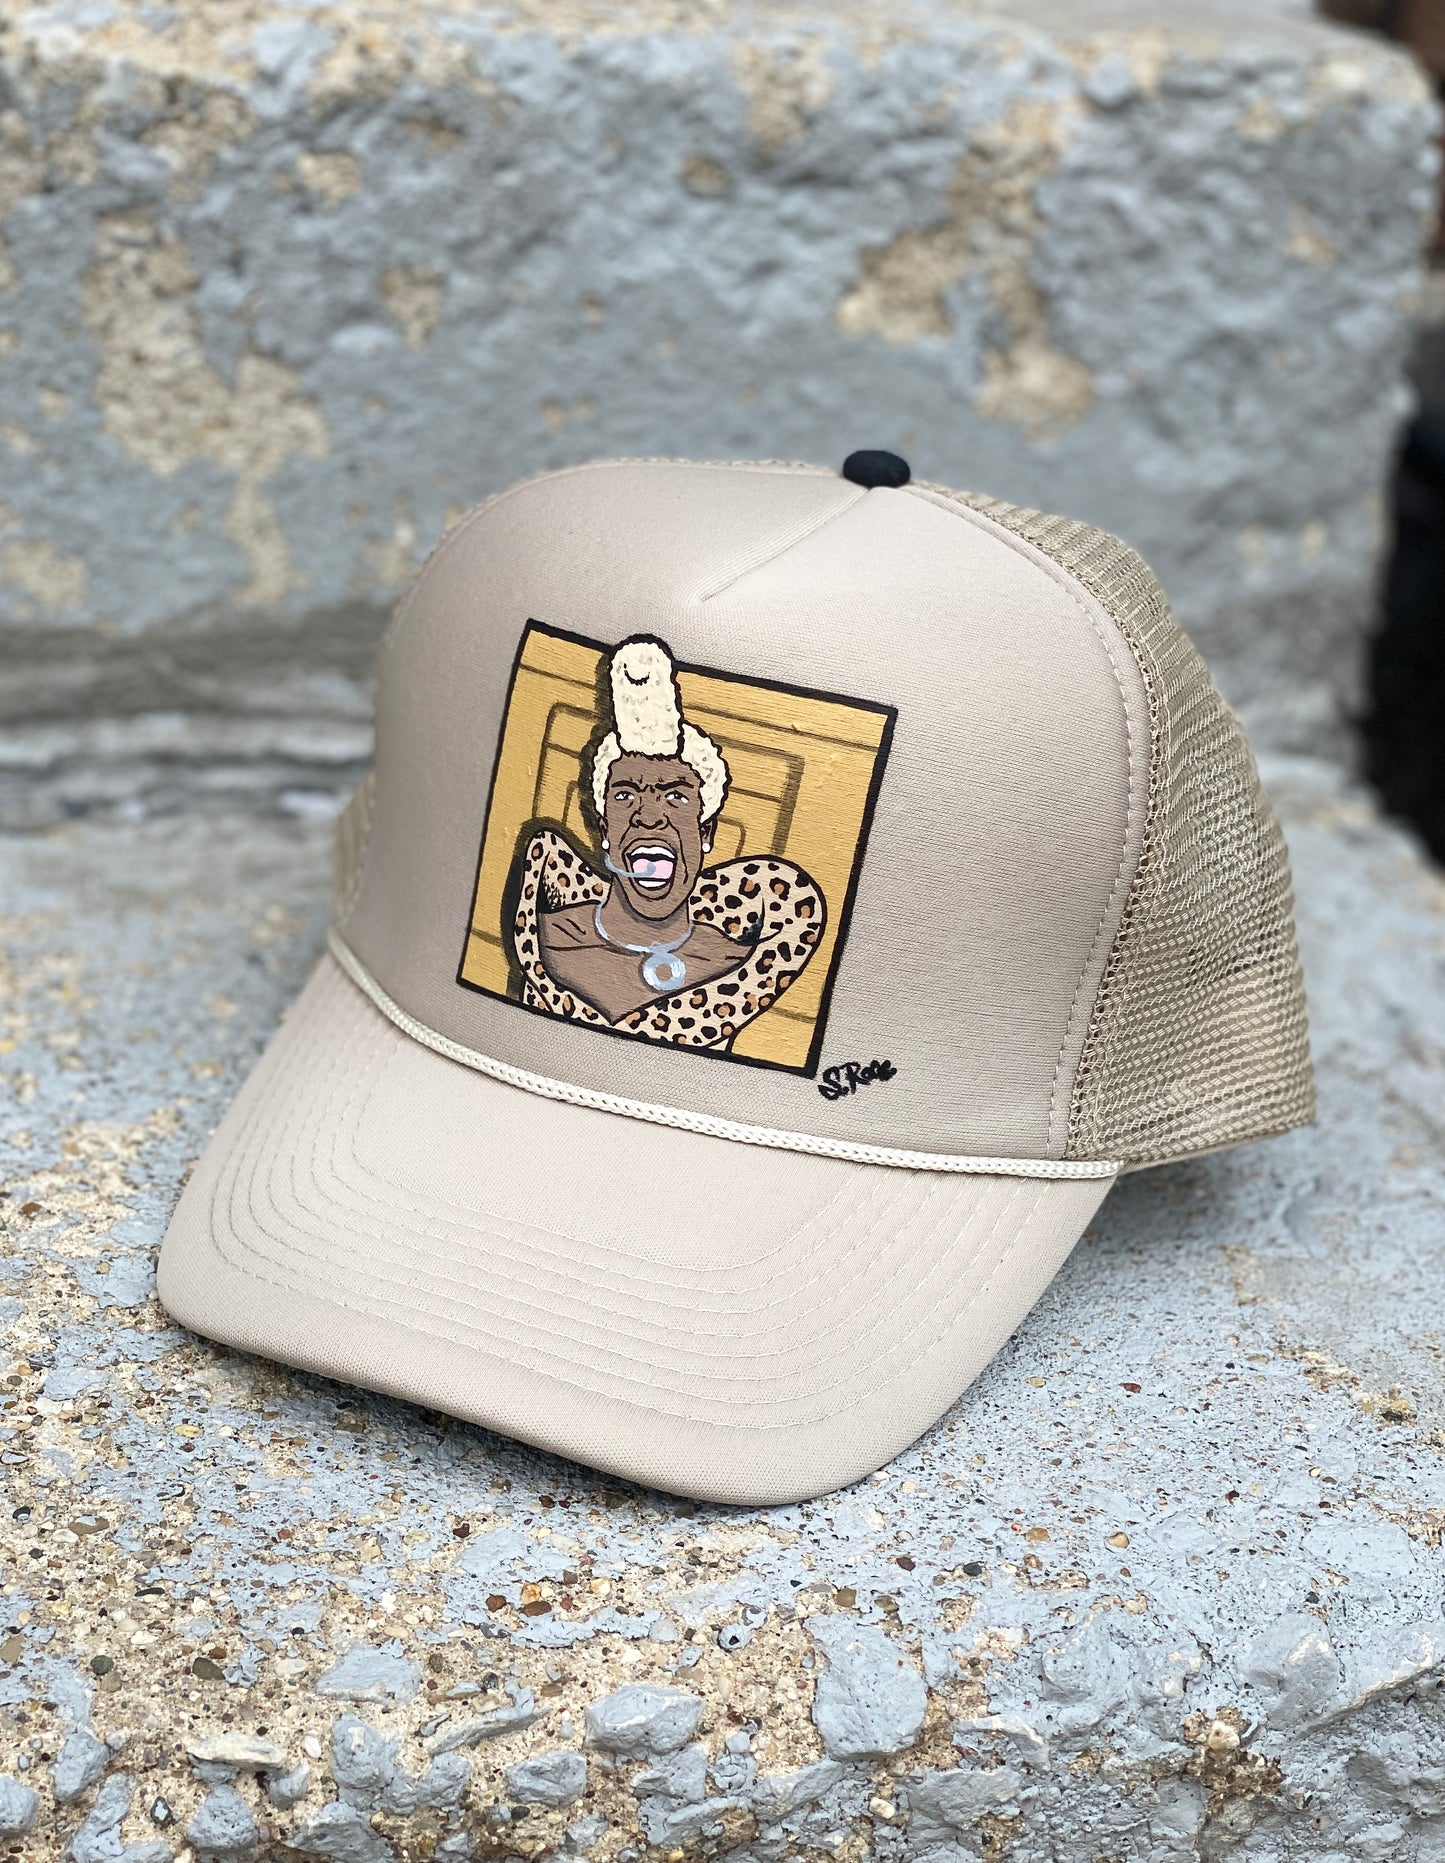 “Fifth Element” Hand painted trucker hat